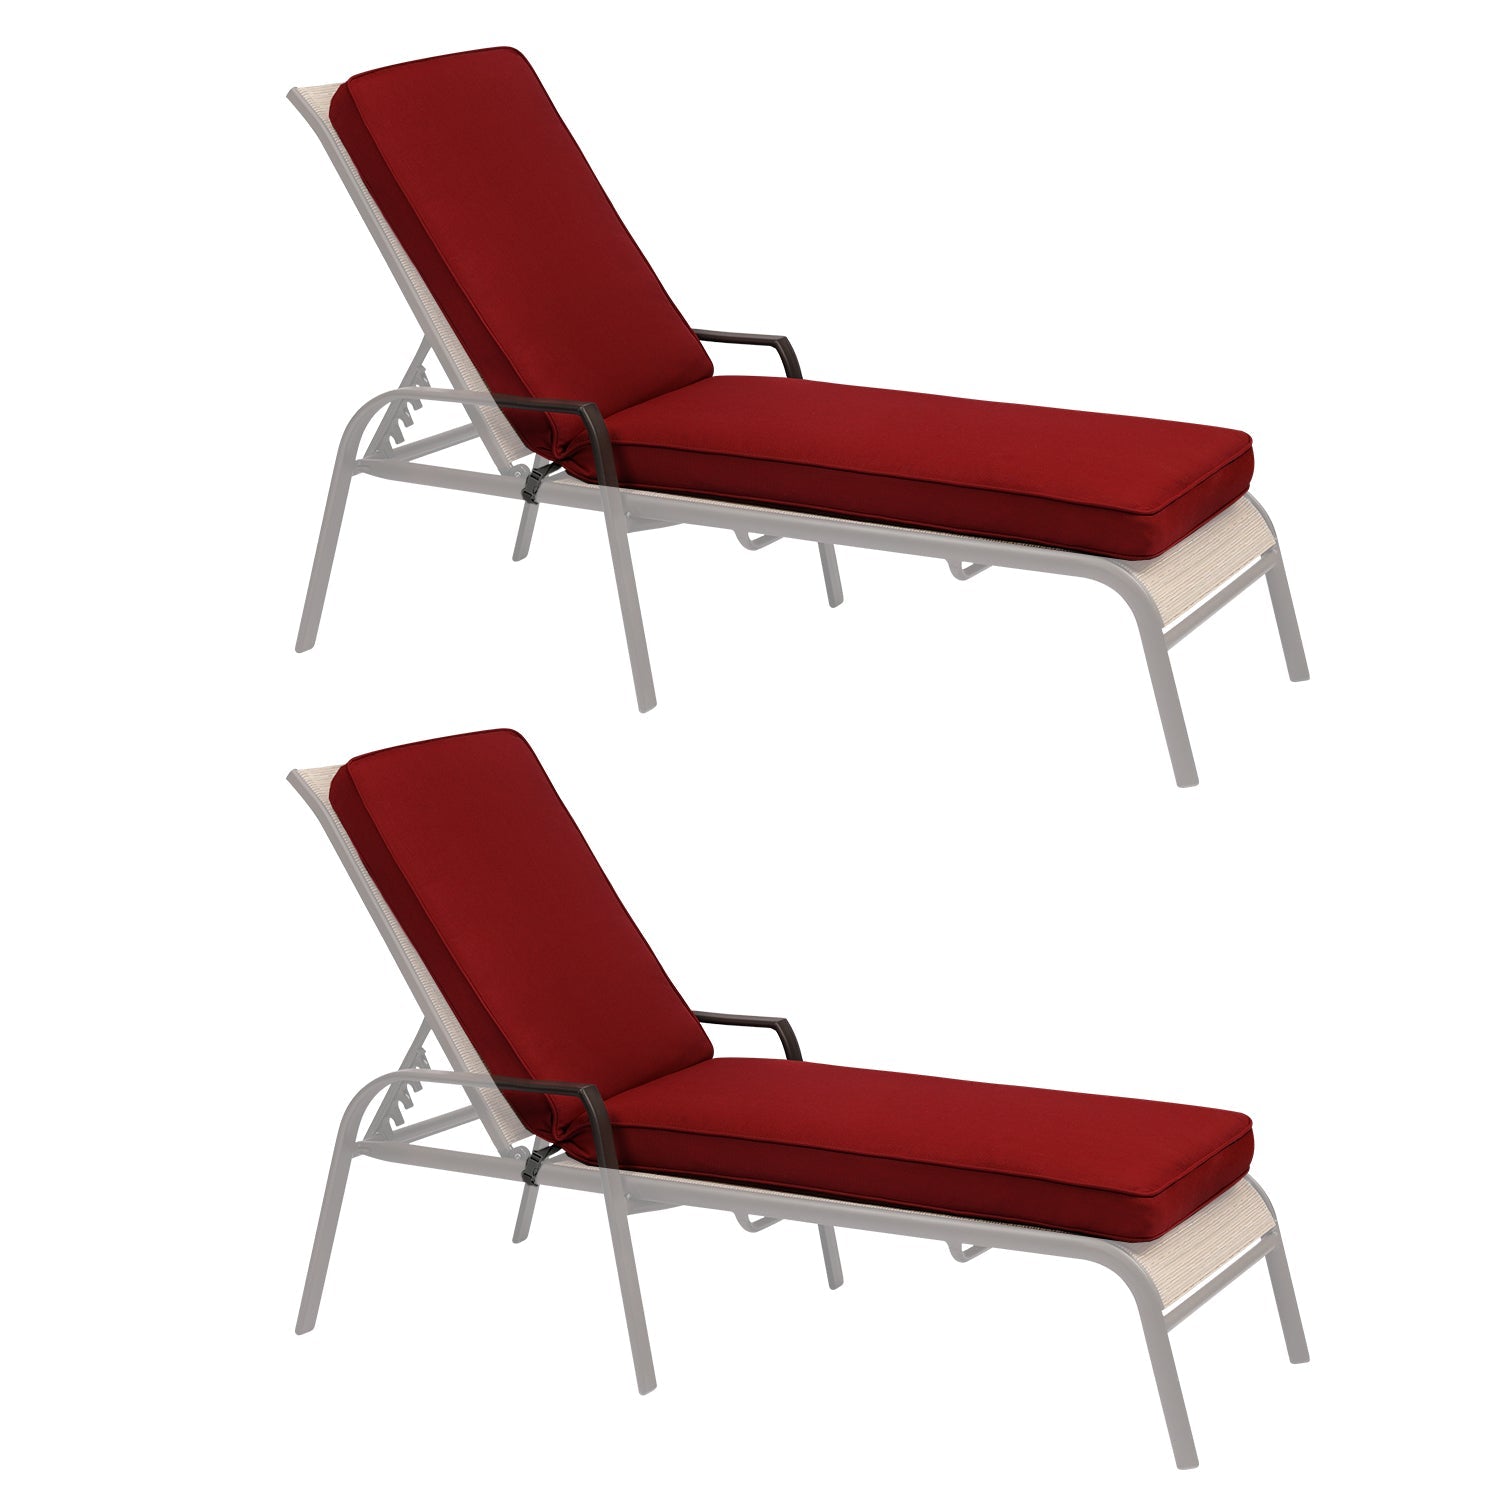 Patio Chaise Lounger Cushions Set of 2, Olefin Fabric, Water-Resistant, 72x21x3 Inches(Only Cushions) CUSHION Aoodor Wine Red  